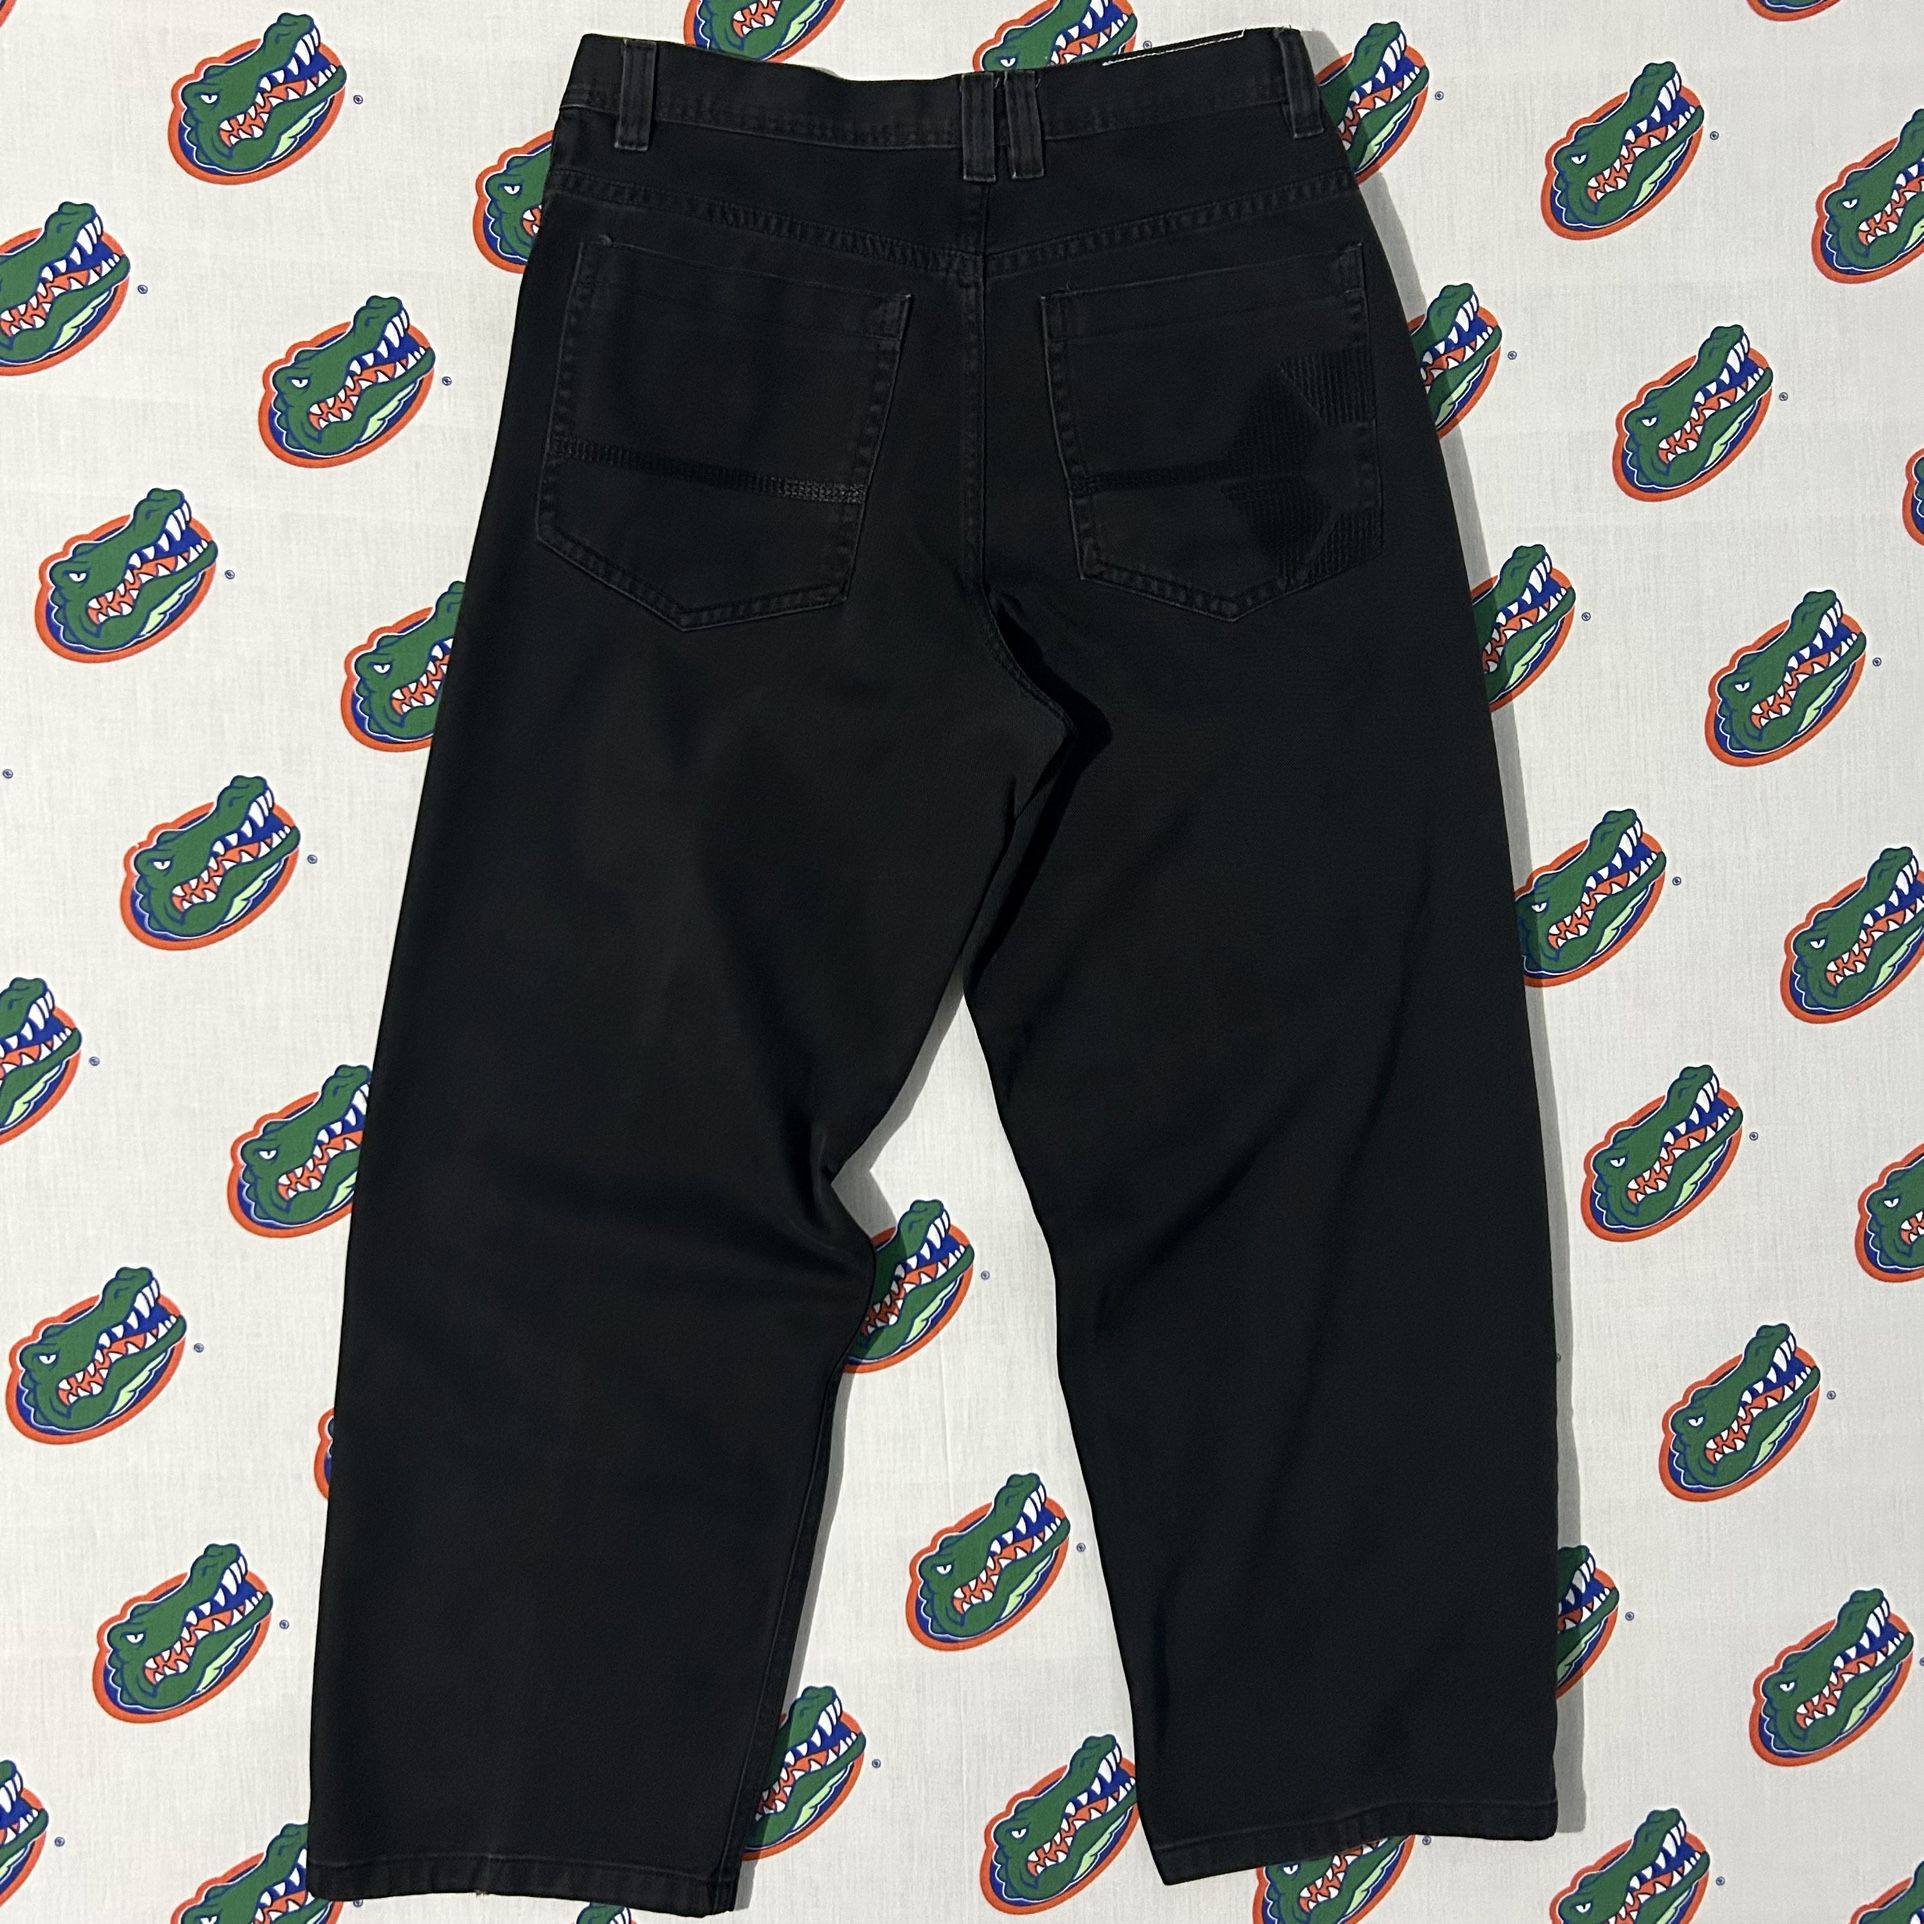 Mens Vintage JNCO Style South Pole Baggy Y2K Skater Pants Size 36 x 30